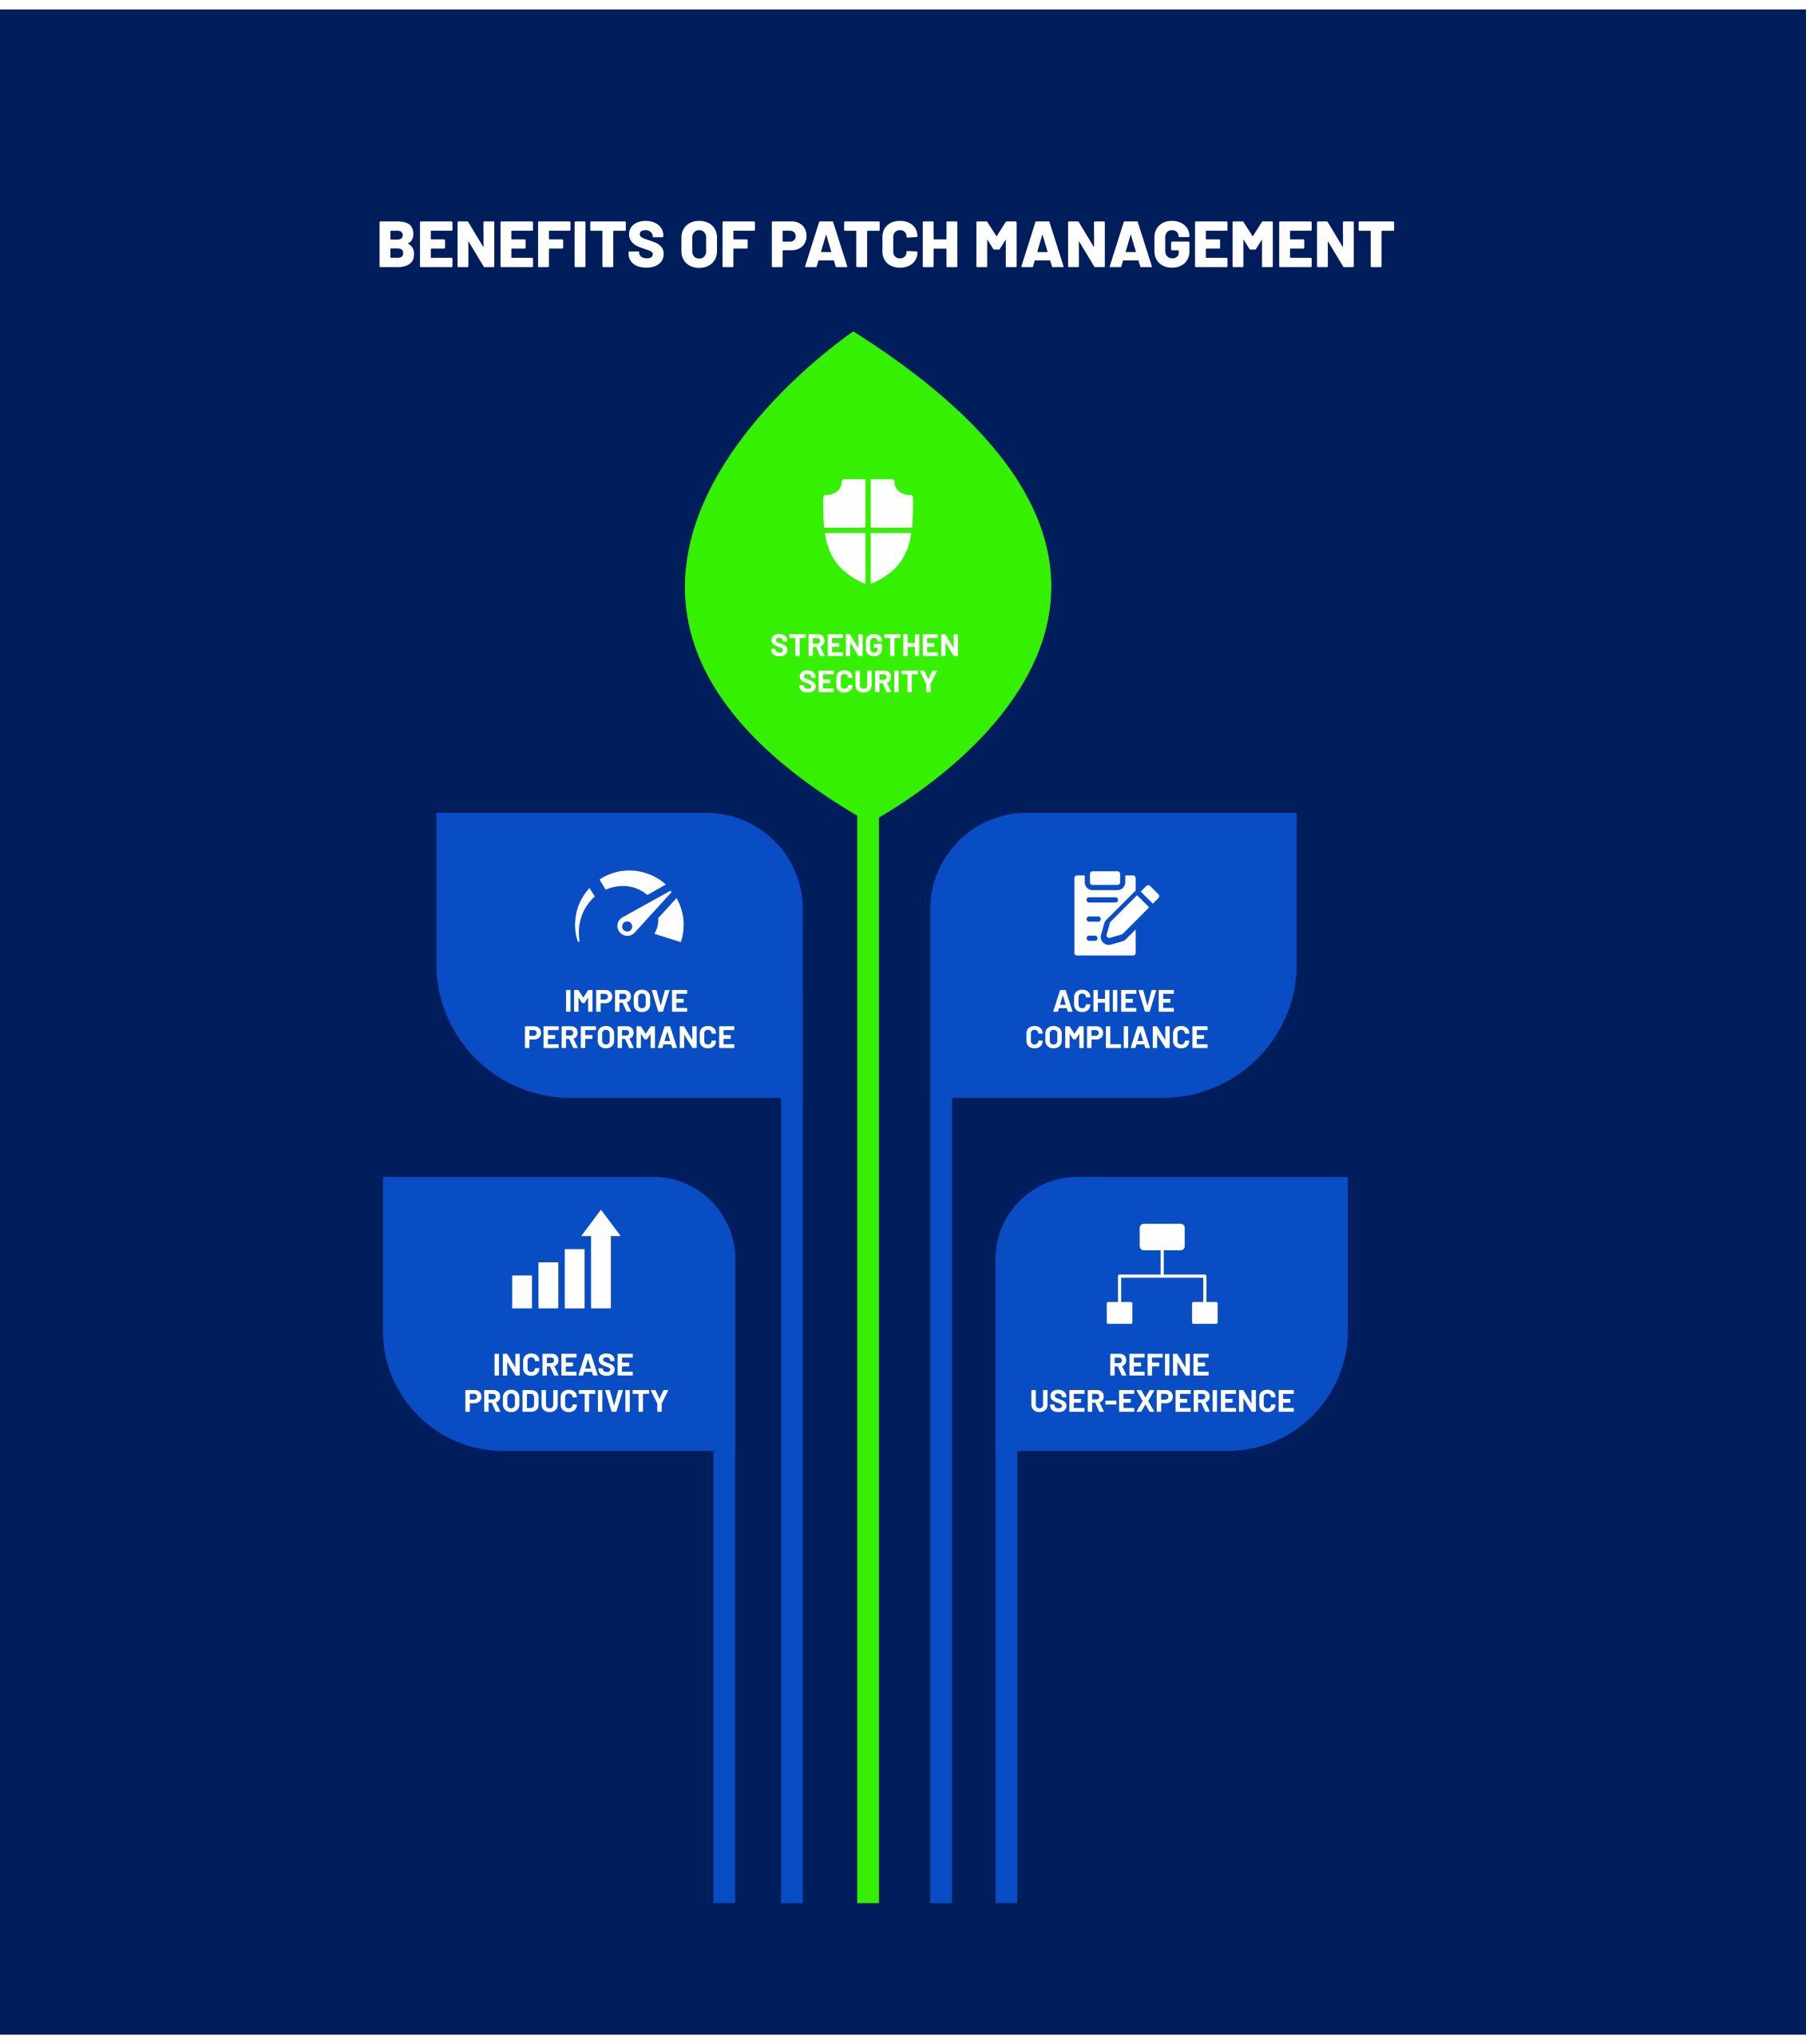 What is patch management benefits?